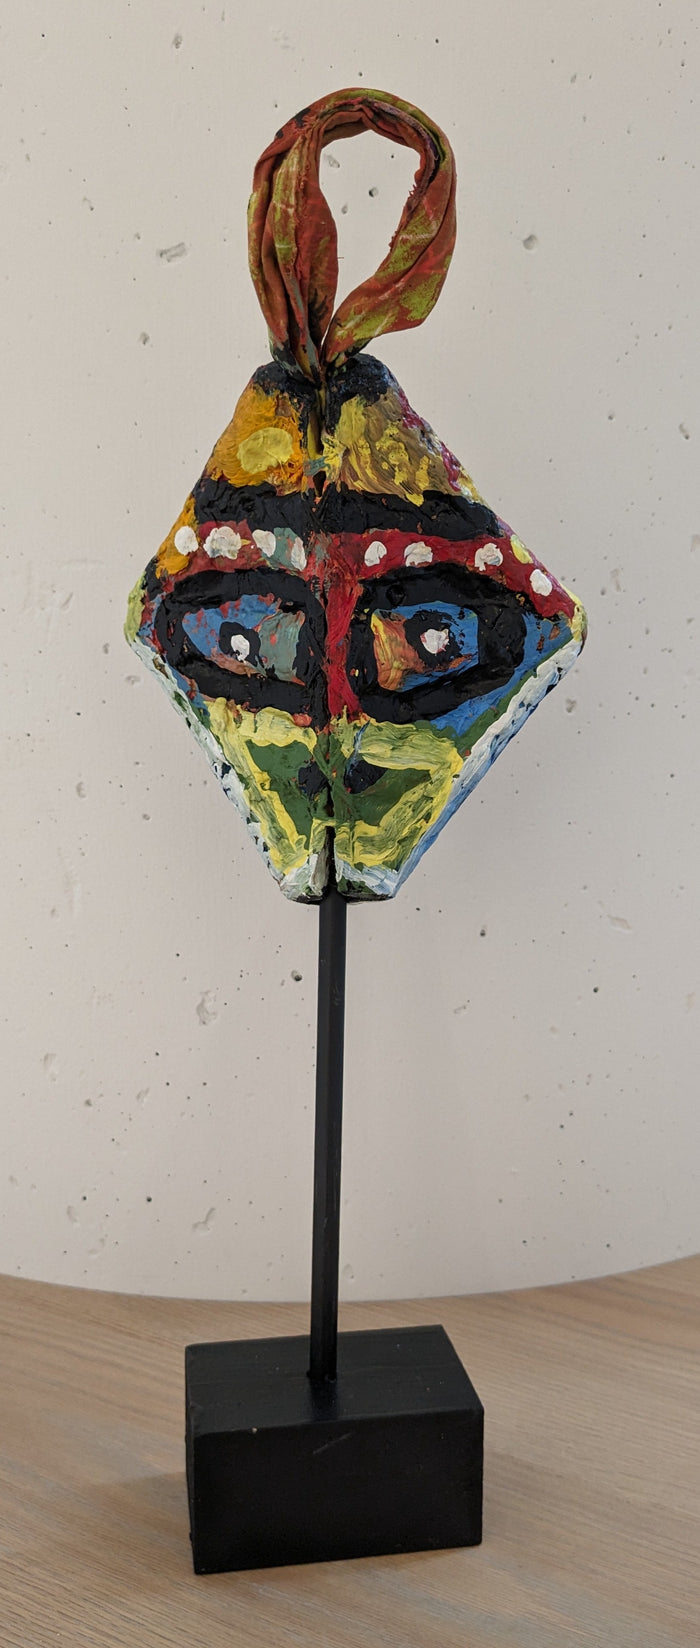 triangular face sculpture hand painted with African mask markings